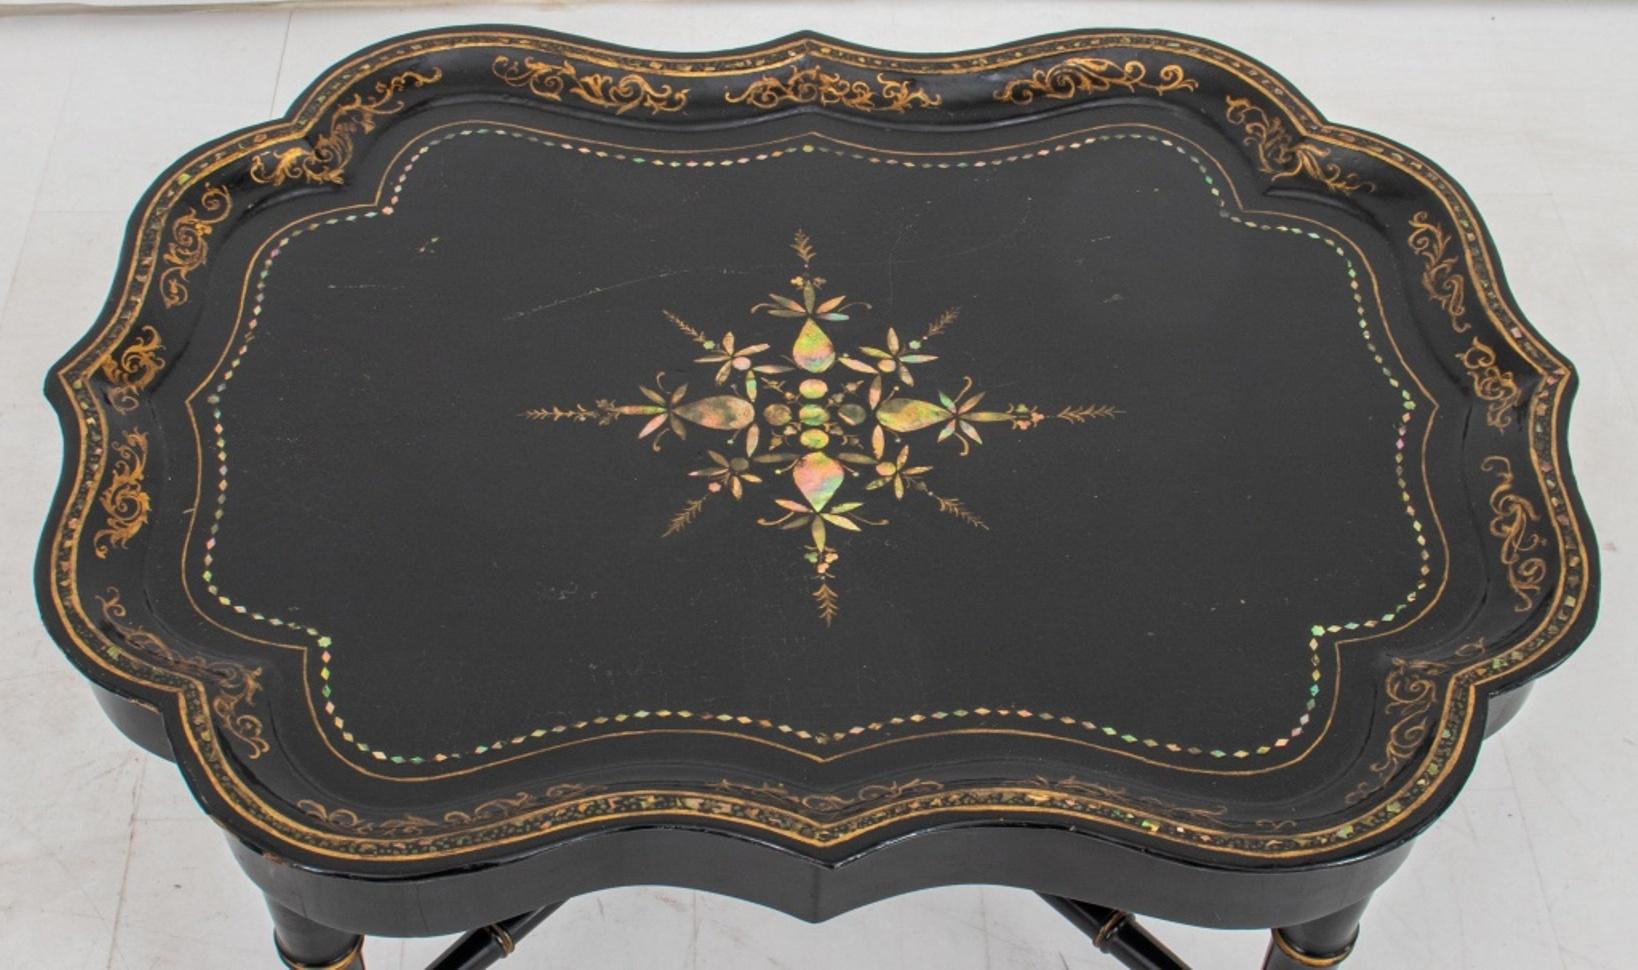 Victorian chinoiserie lacquered and abalone inlaid (papier-mache) tray table, with scalloped edges inlaid with shell fragments, the tray lacquered black with gilt decoration to surface and rim, the tray resting upon a conforming bamboo style base